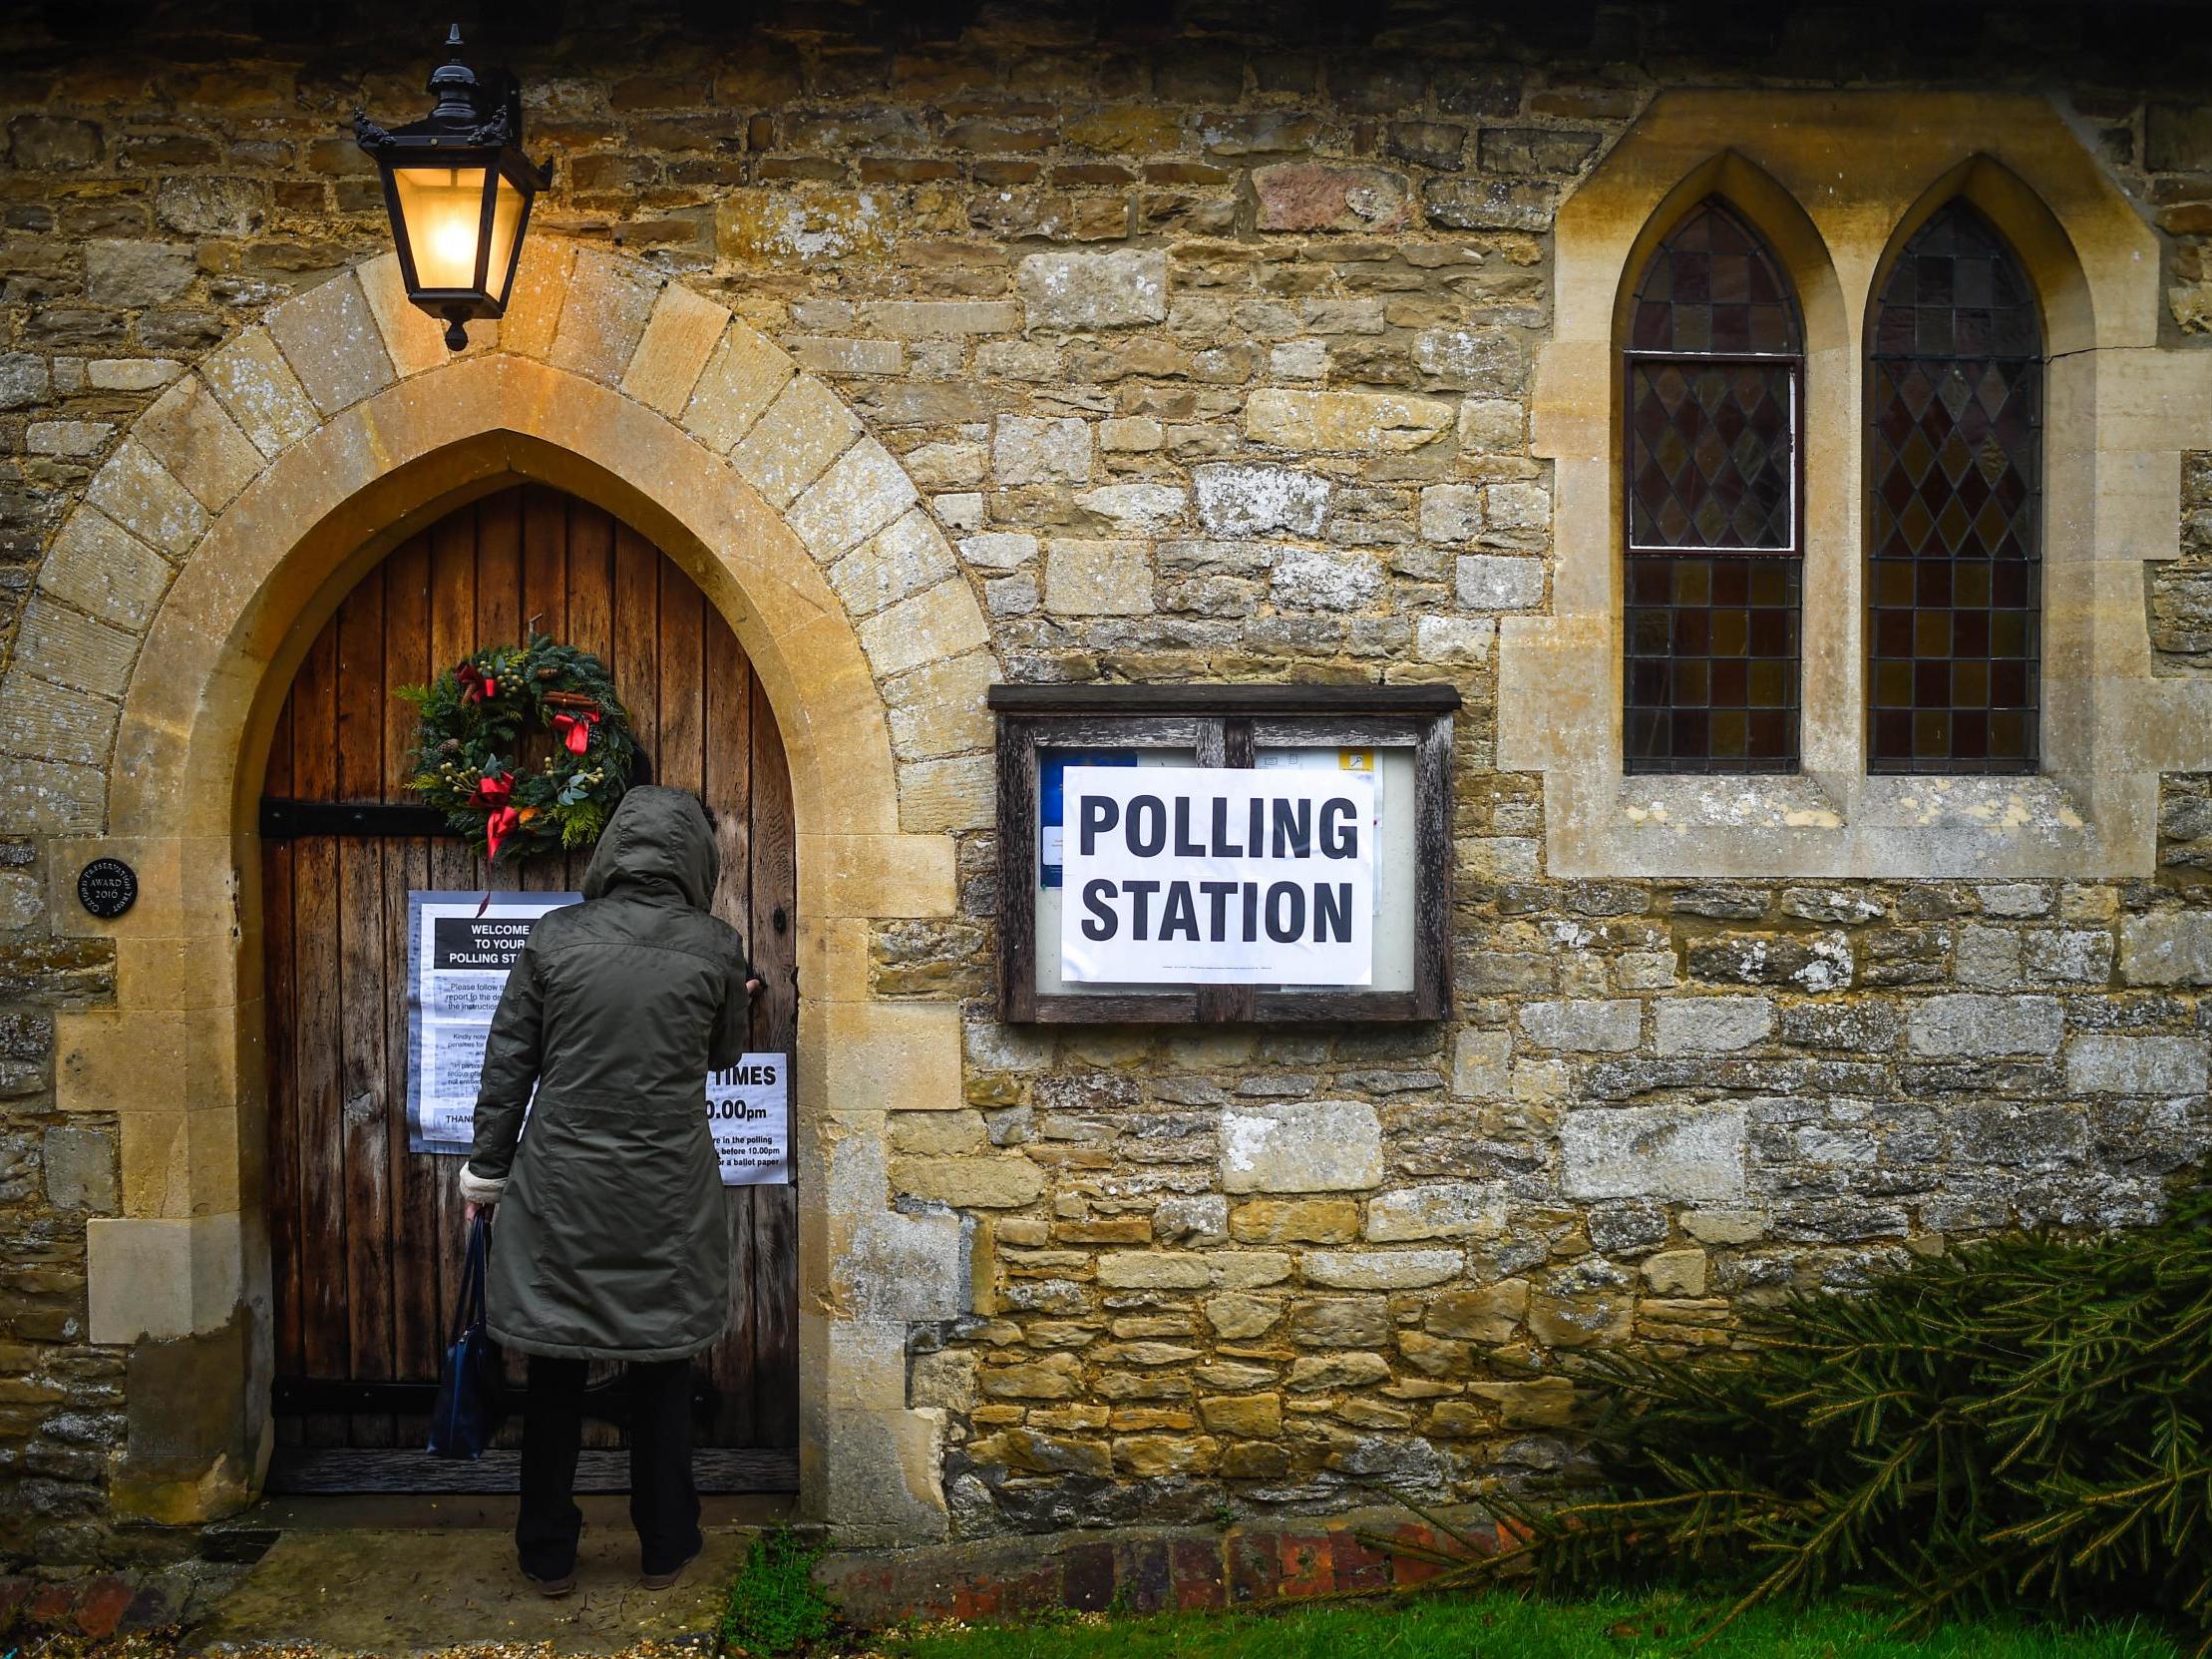 The government wants UK voters to show photo ID at polling stations